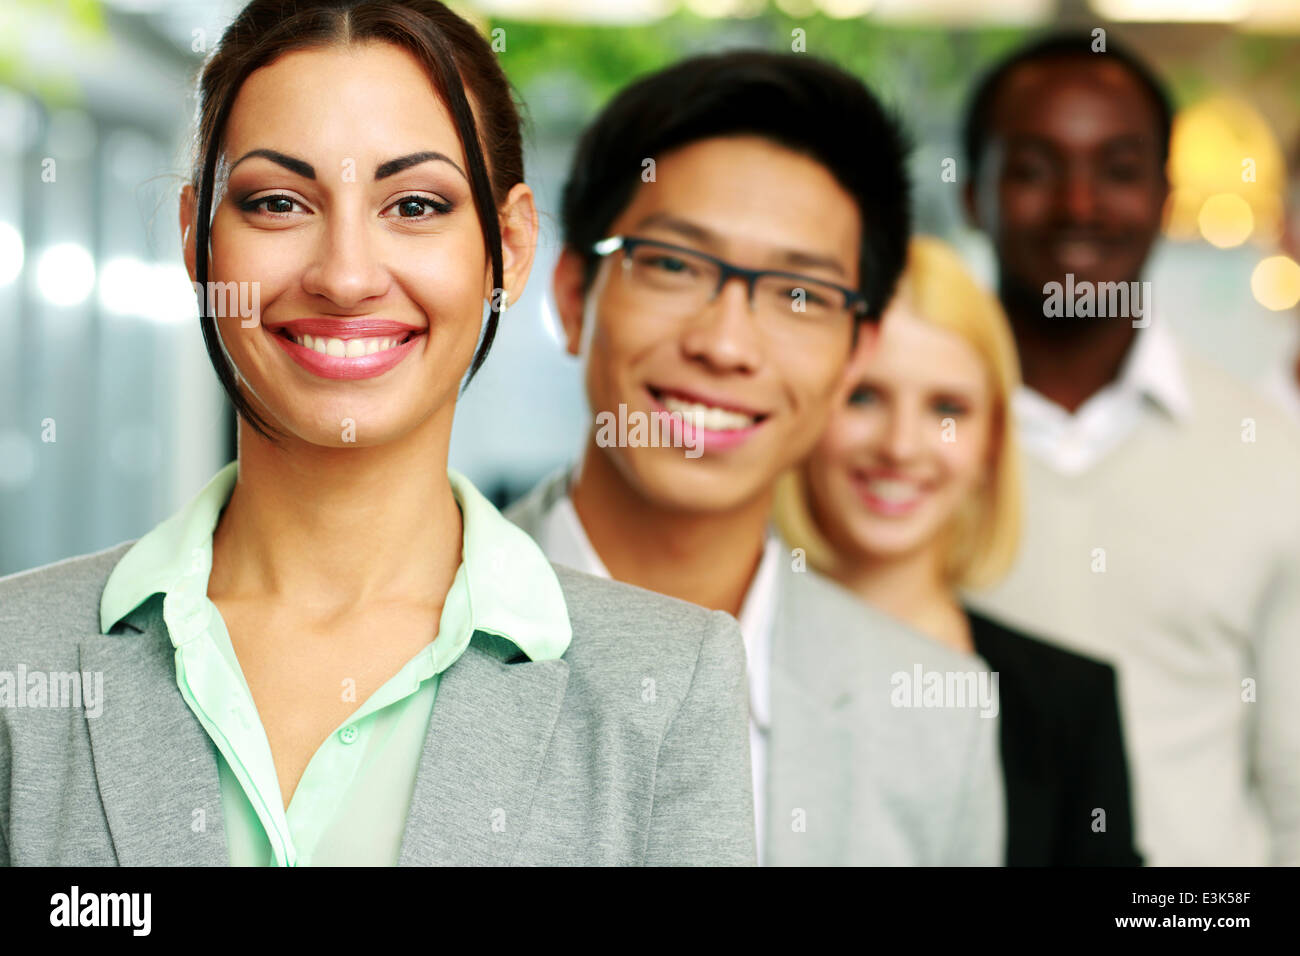 Cheerful businesswoman standing in front of colleagues Stock Photo